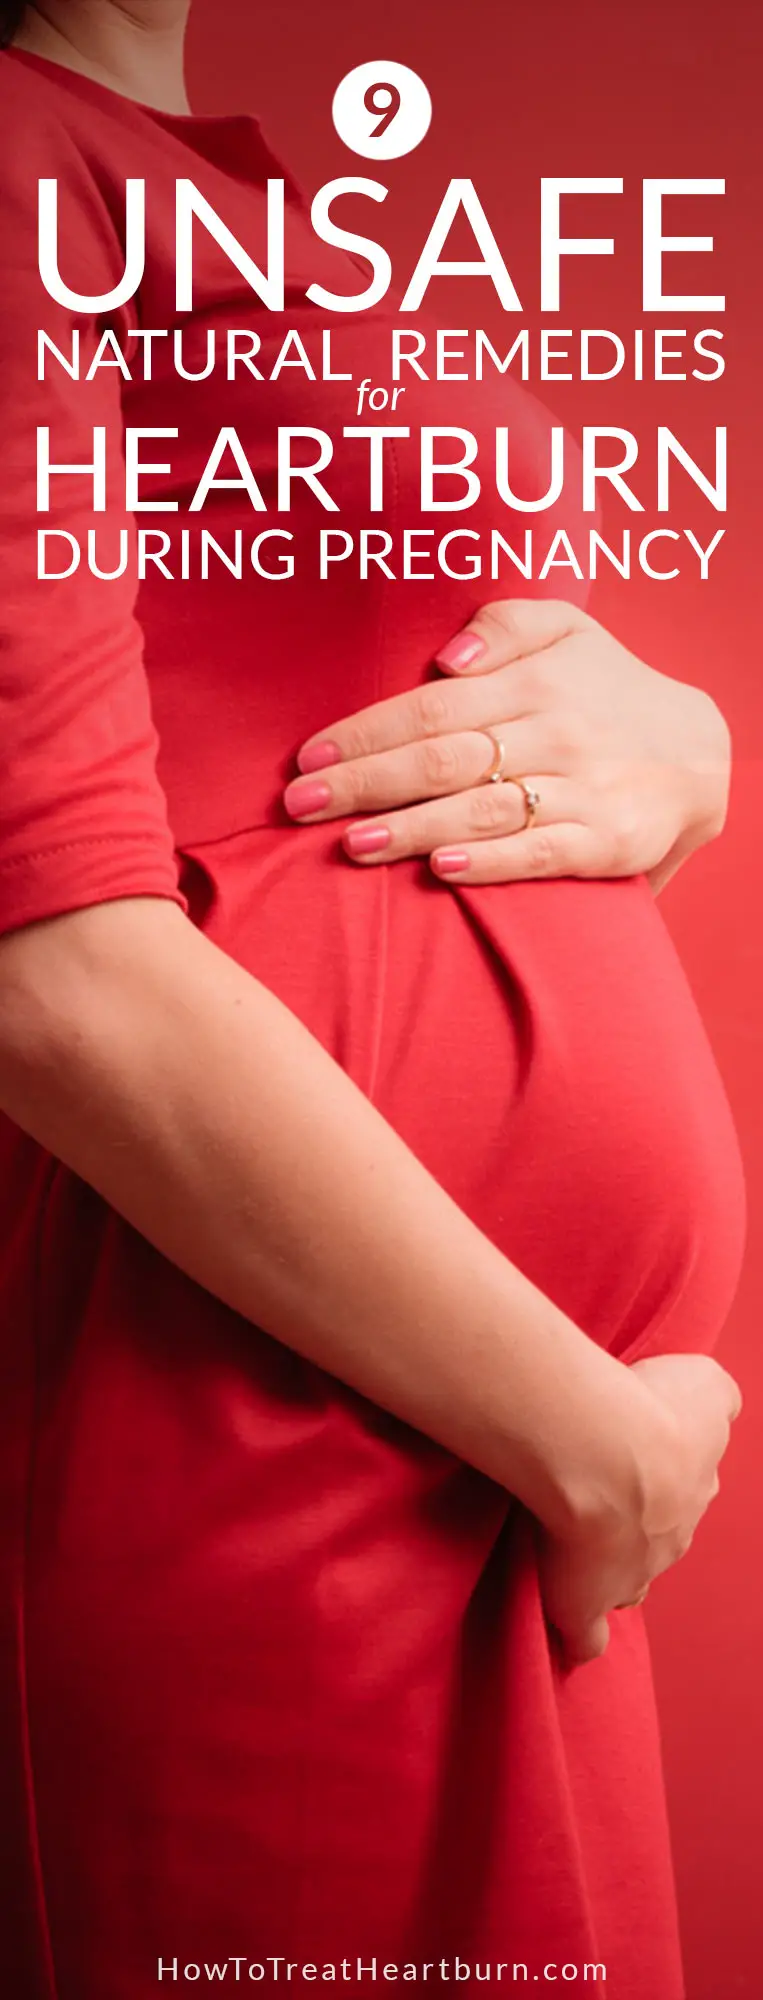 When pregnant or breastfeeding many natural heartburn remedies are unsafe. There are 9 unsafe natural heartburn remedies to avoid during pregnancy.